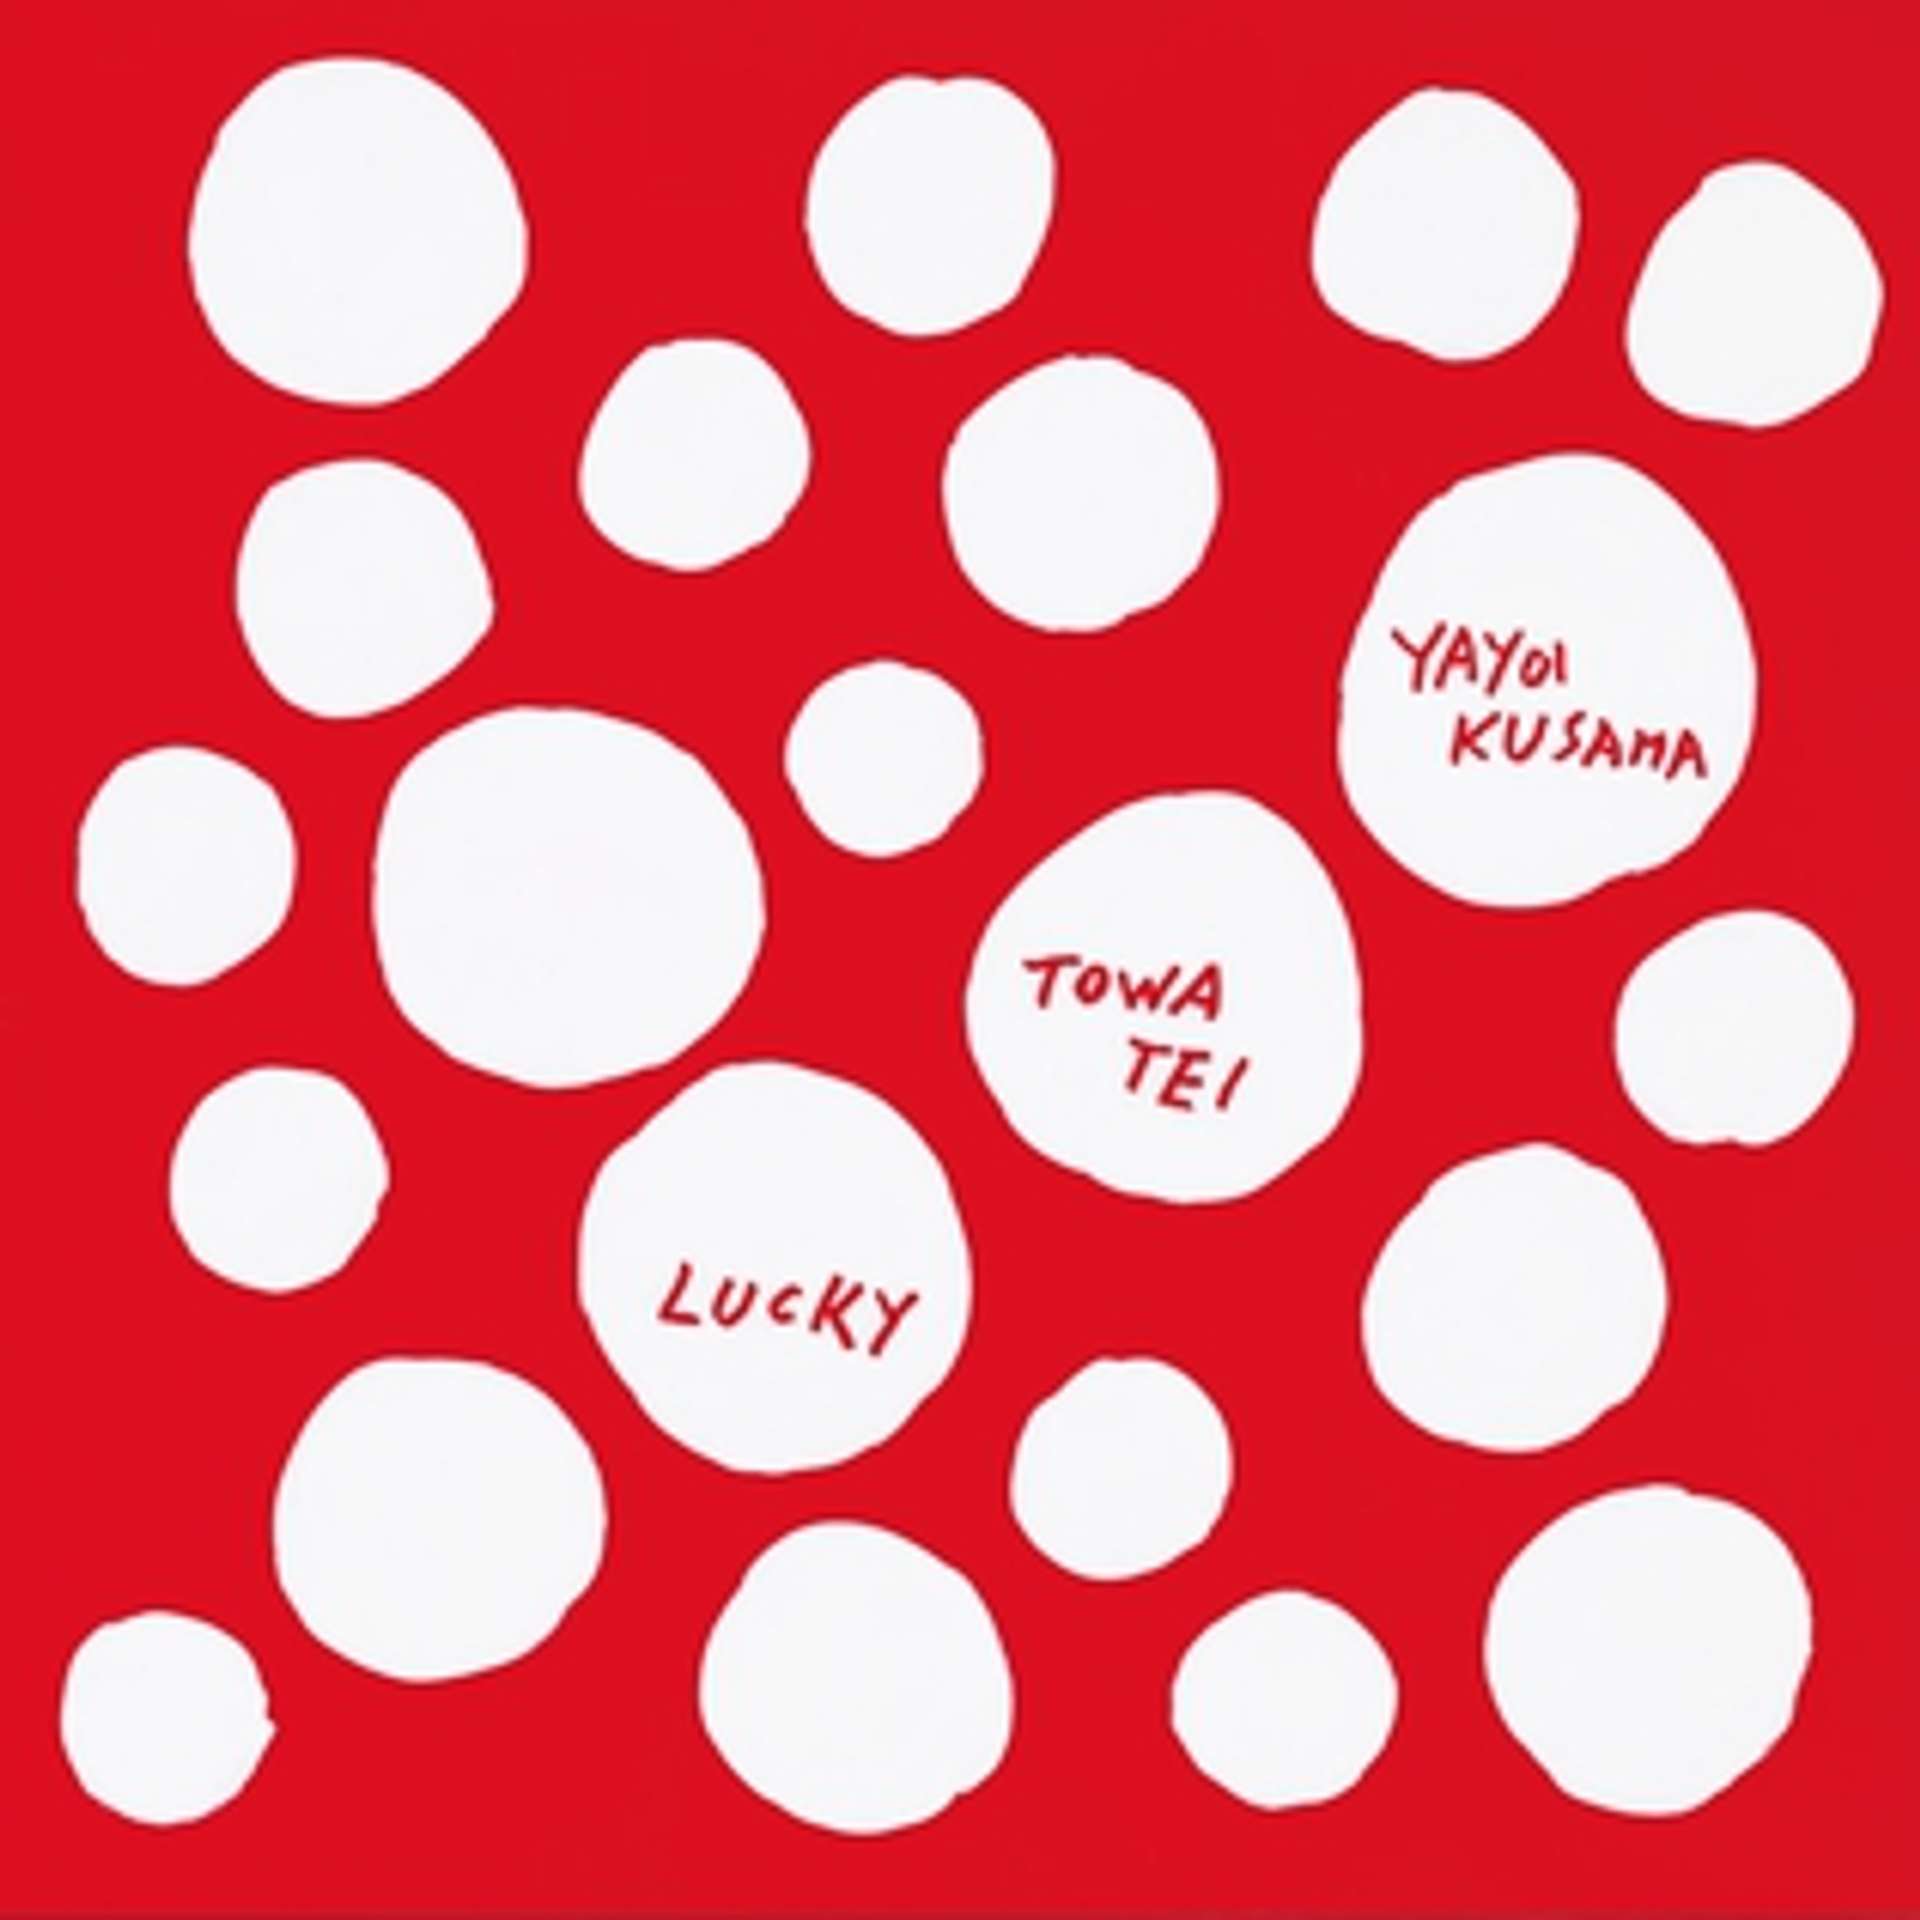 An image of the album cover for Lucky by DJ Towa Tei, showing several of Yayoi Kusama’s white polka dots against a red background.